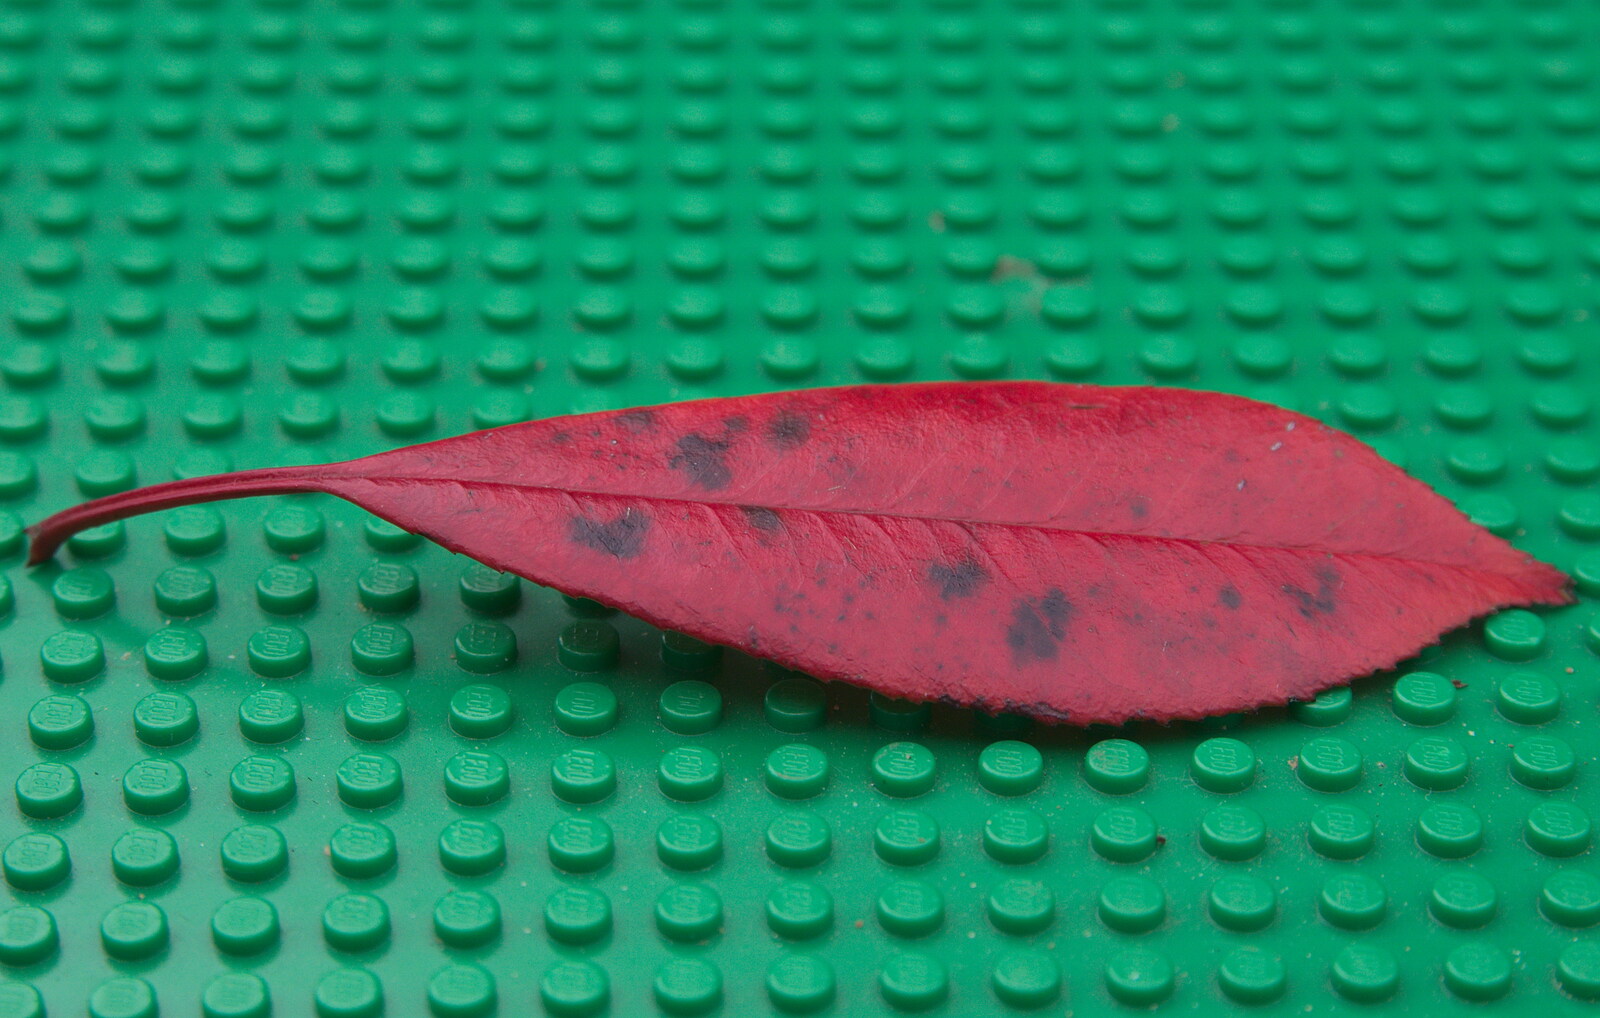 A red leaf on a green Lego base from The Launching of the Jolly Conkerer, The Oaksmere, Brome, Suffolk - 3rd April 2015